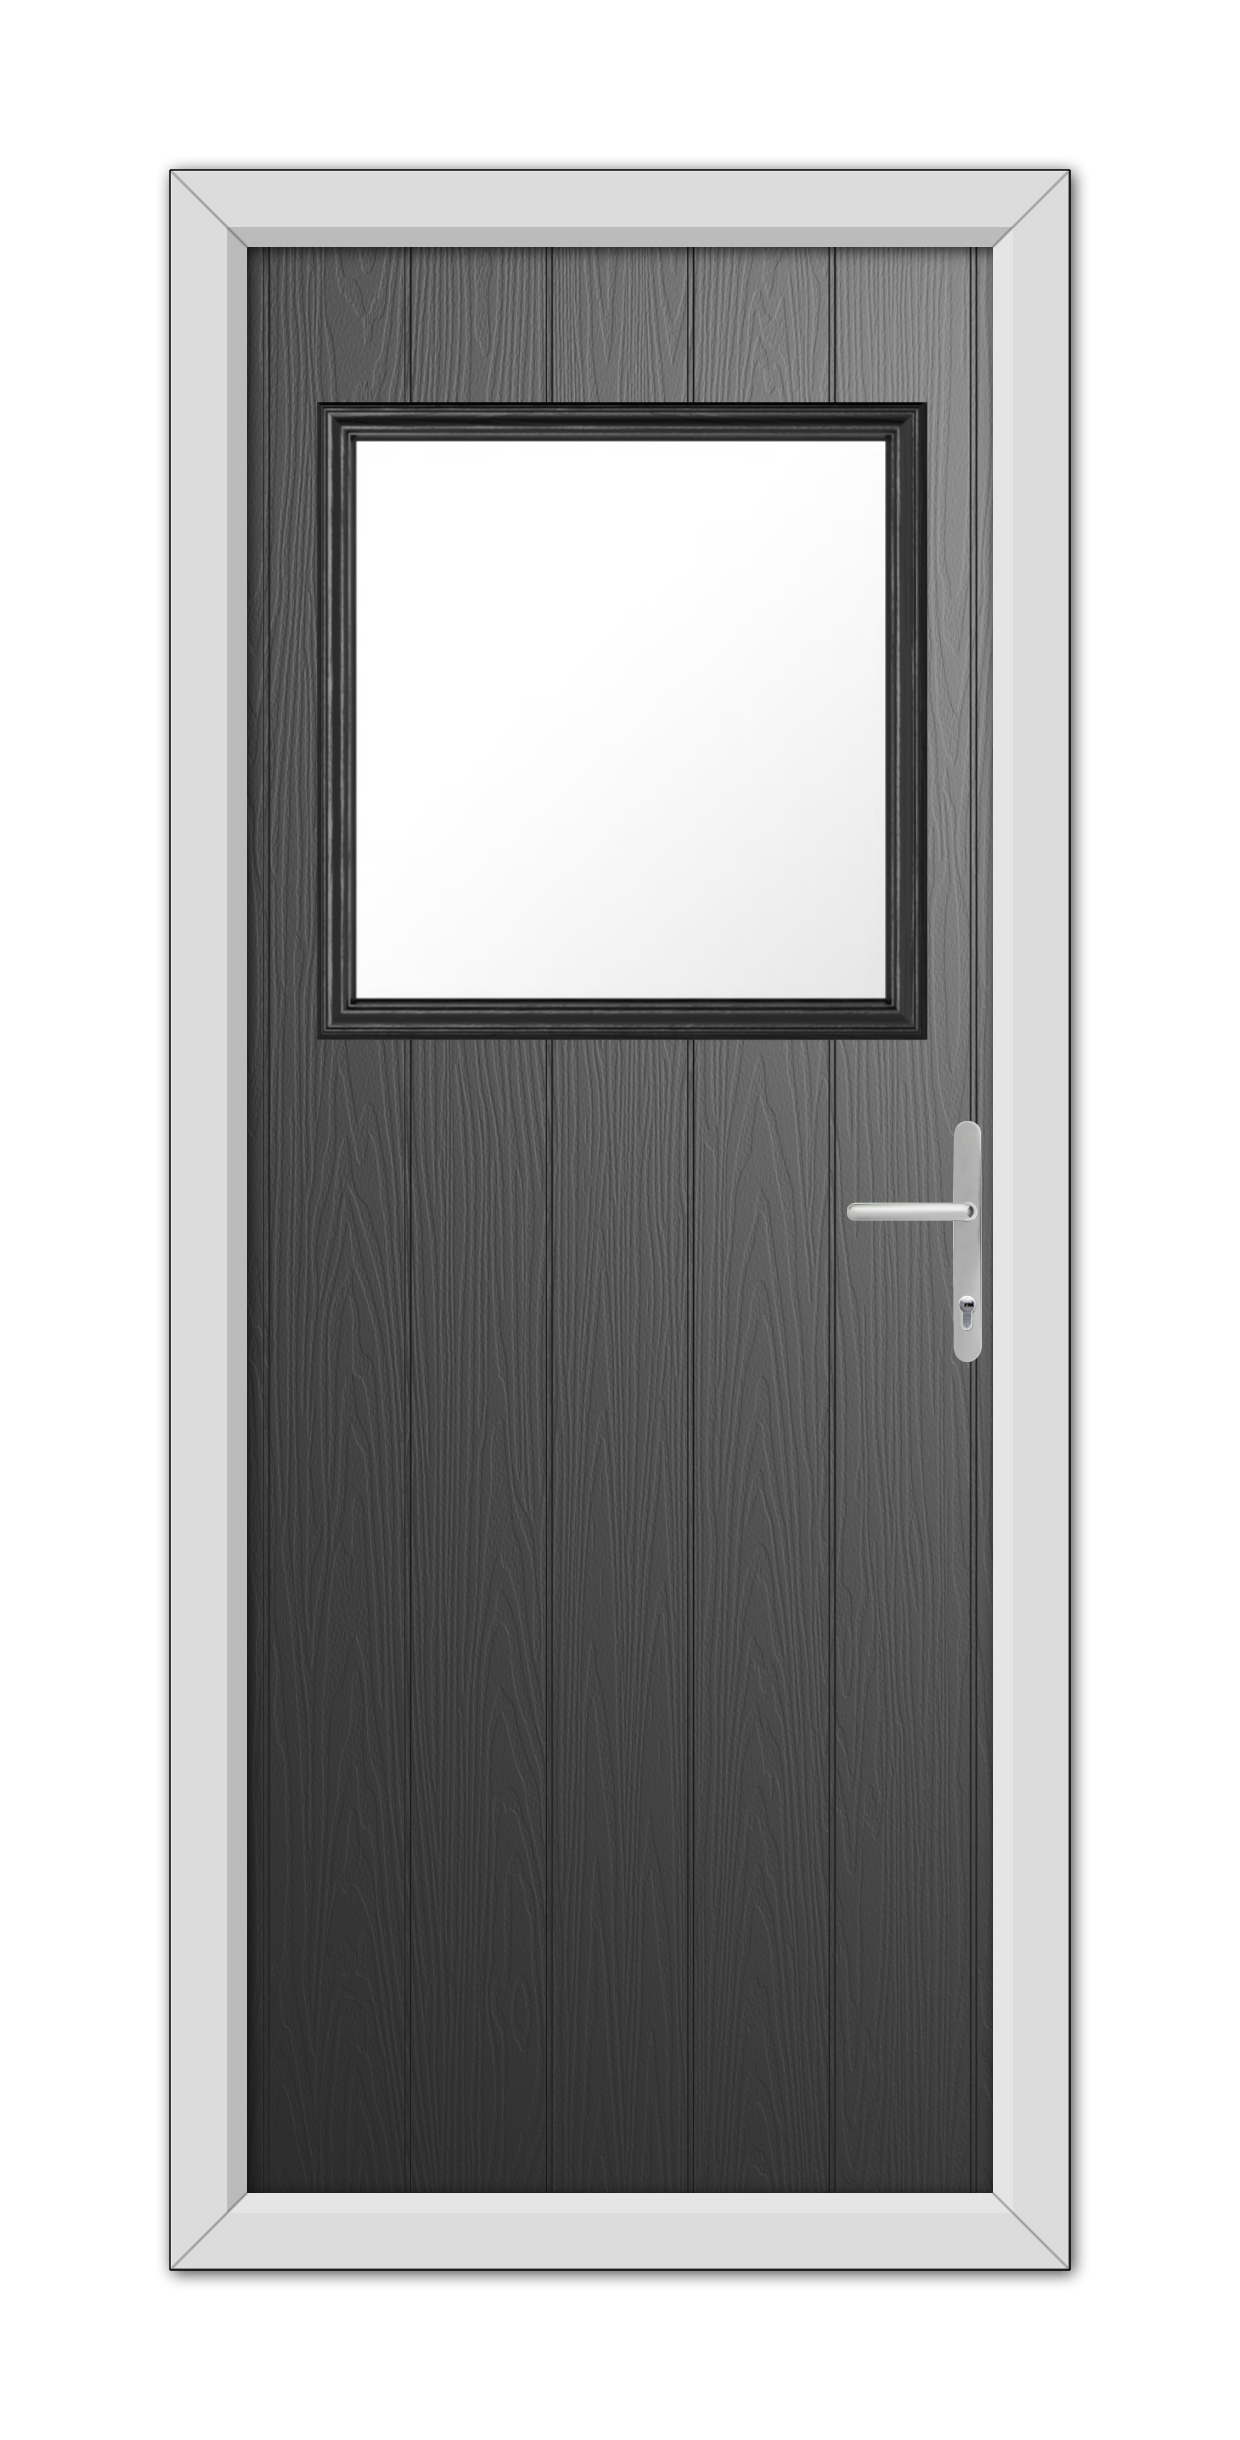 A modern Black Fife Composite Door 48mm Timber Core with a small rectangular window, equipped with a silver handle, framed in white.